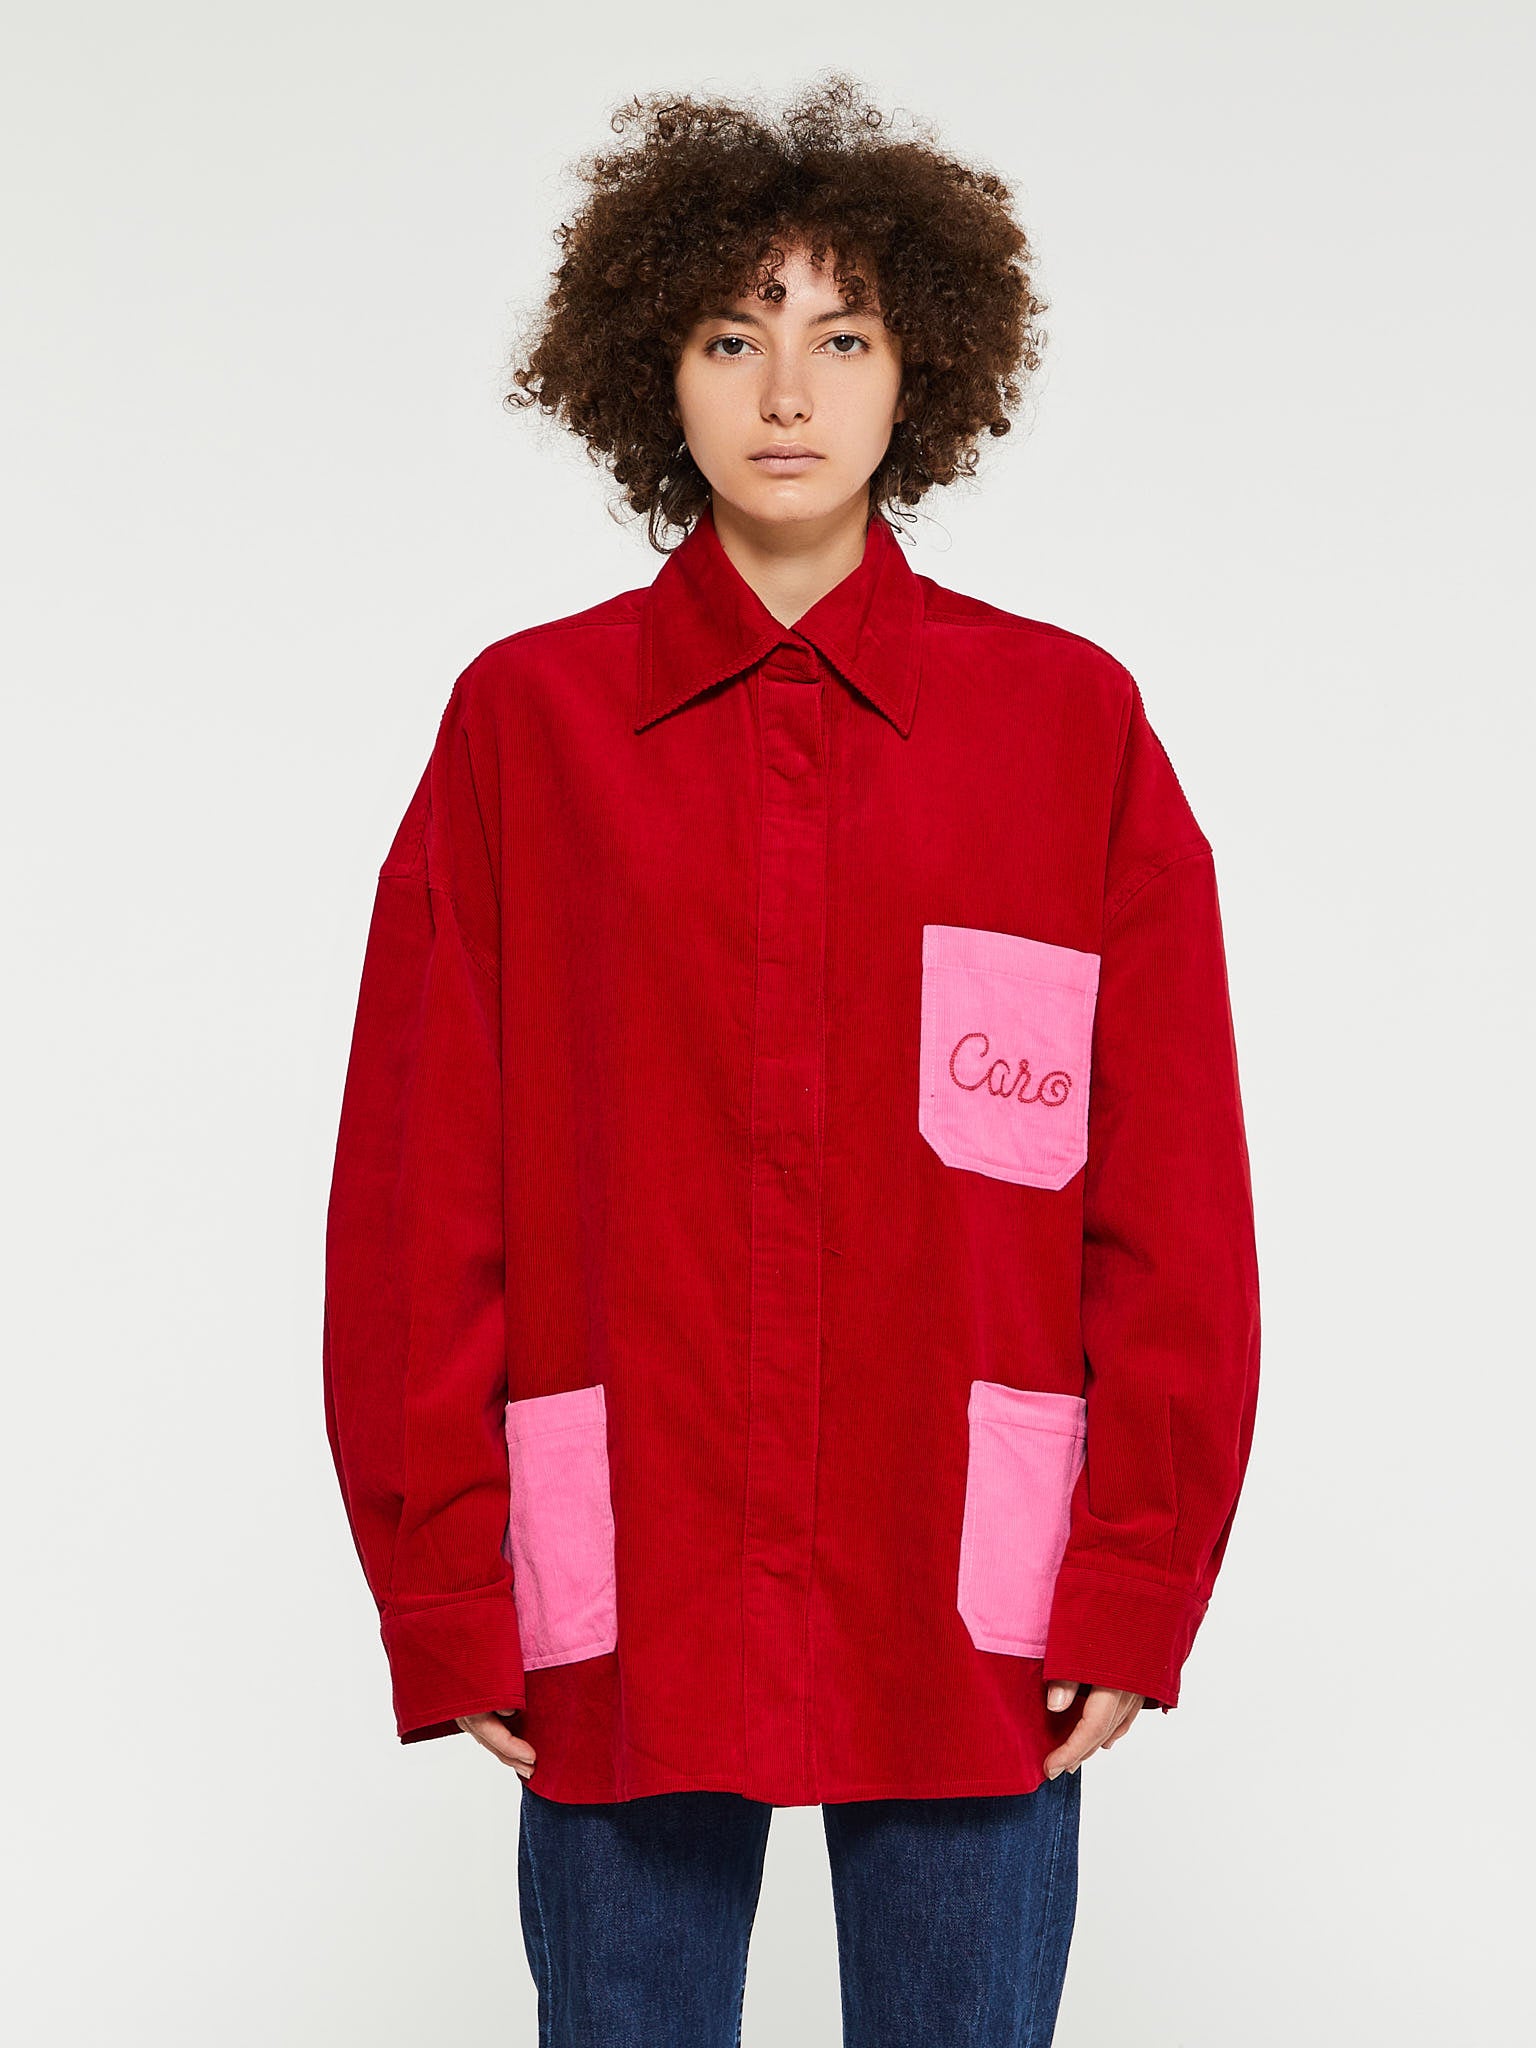 CARO Editions - Frederik Shirt in Red With Pink